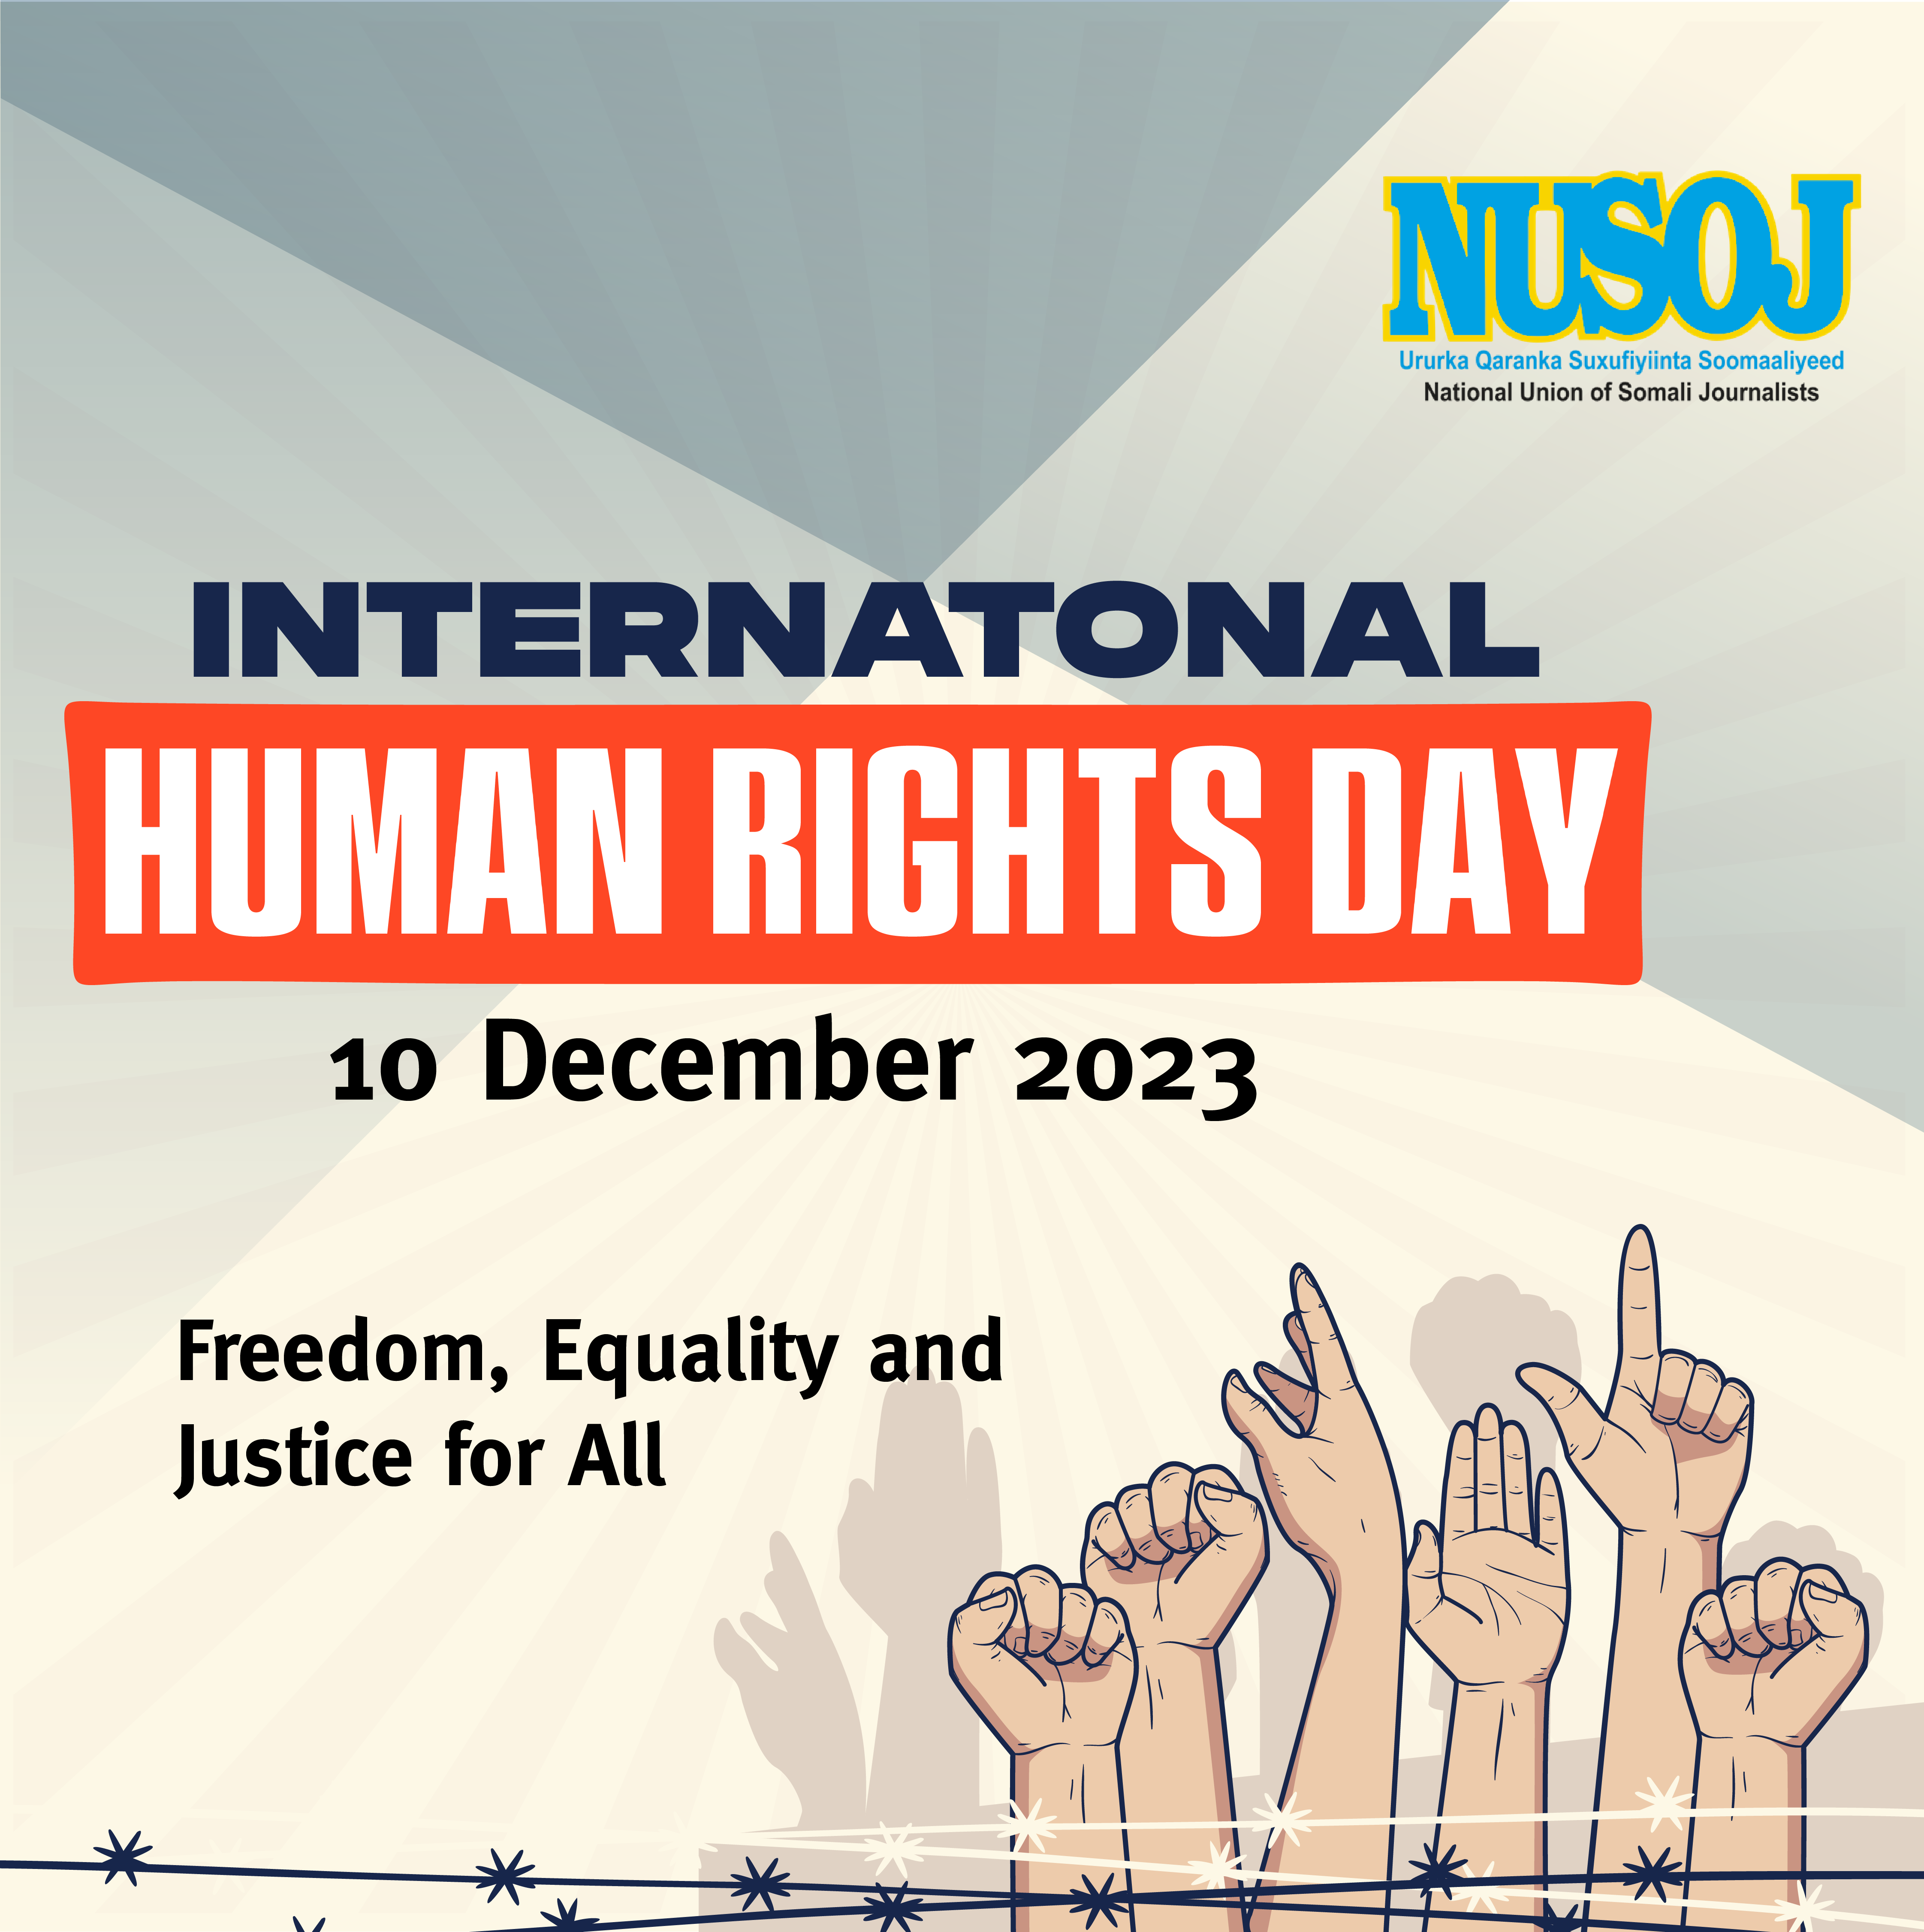 Solidarity for the Rights of Journalists and Access to Information Right – Marking International Human Rights Day 